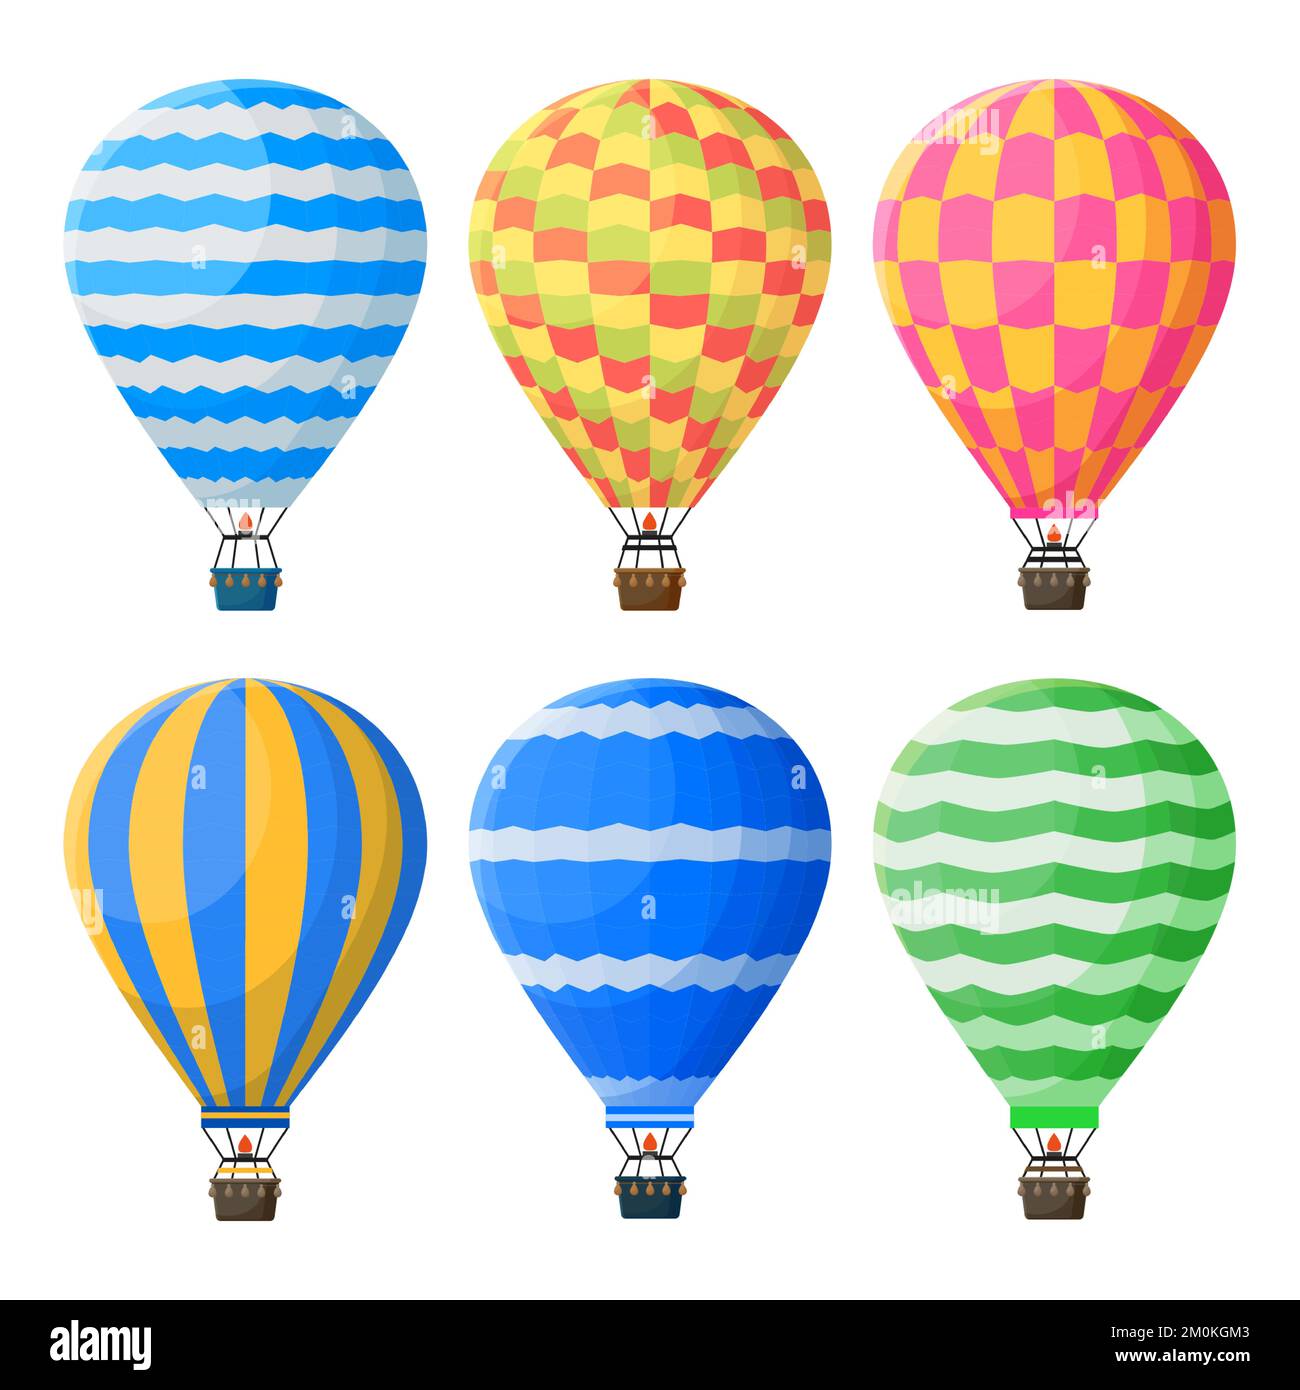 Hot air balloons, colorful flying vintage airships. Sky vehicle for adventure, traveling activity. Airship journey Stock Vector